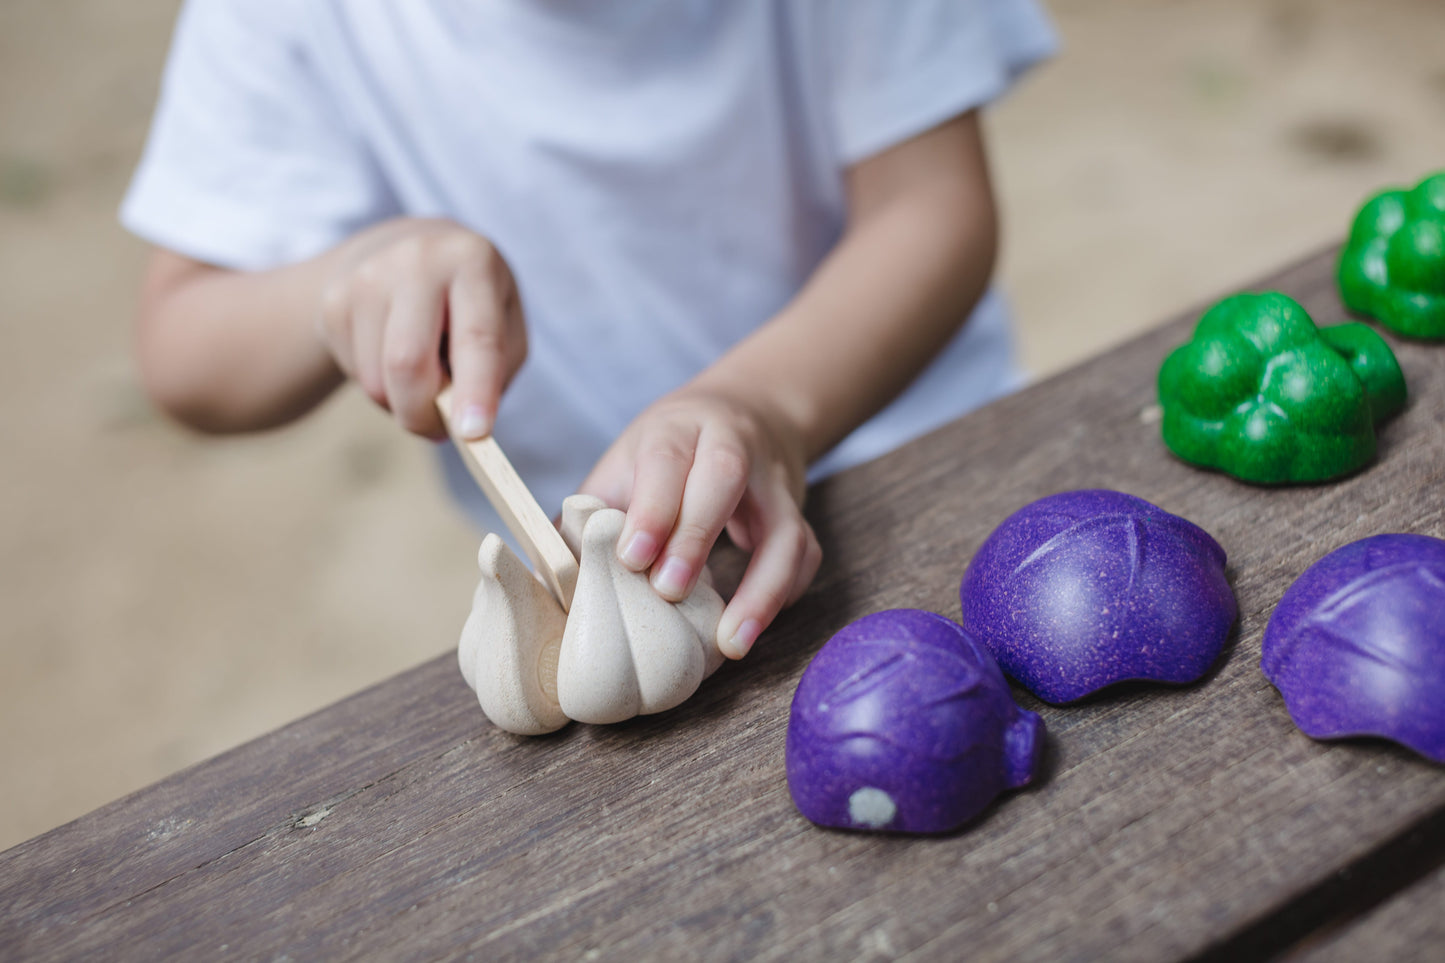 A child cutting a wooden garlic bulb on a wooden table